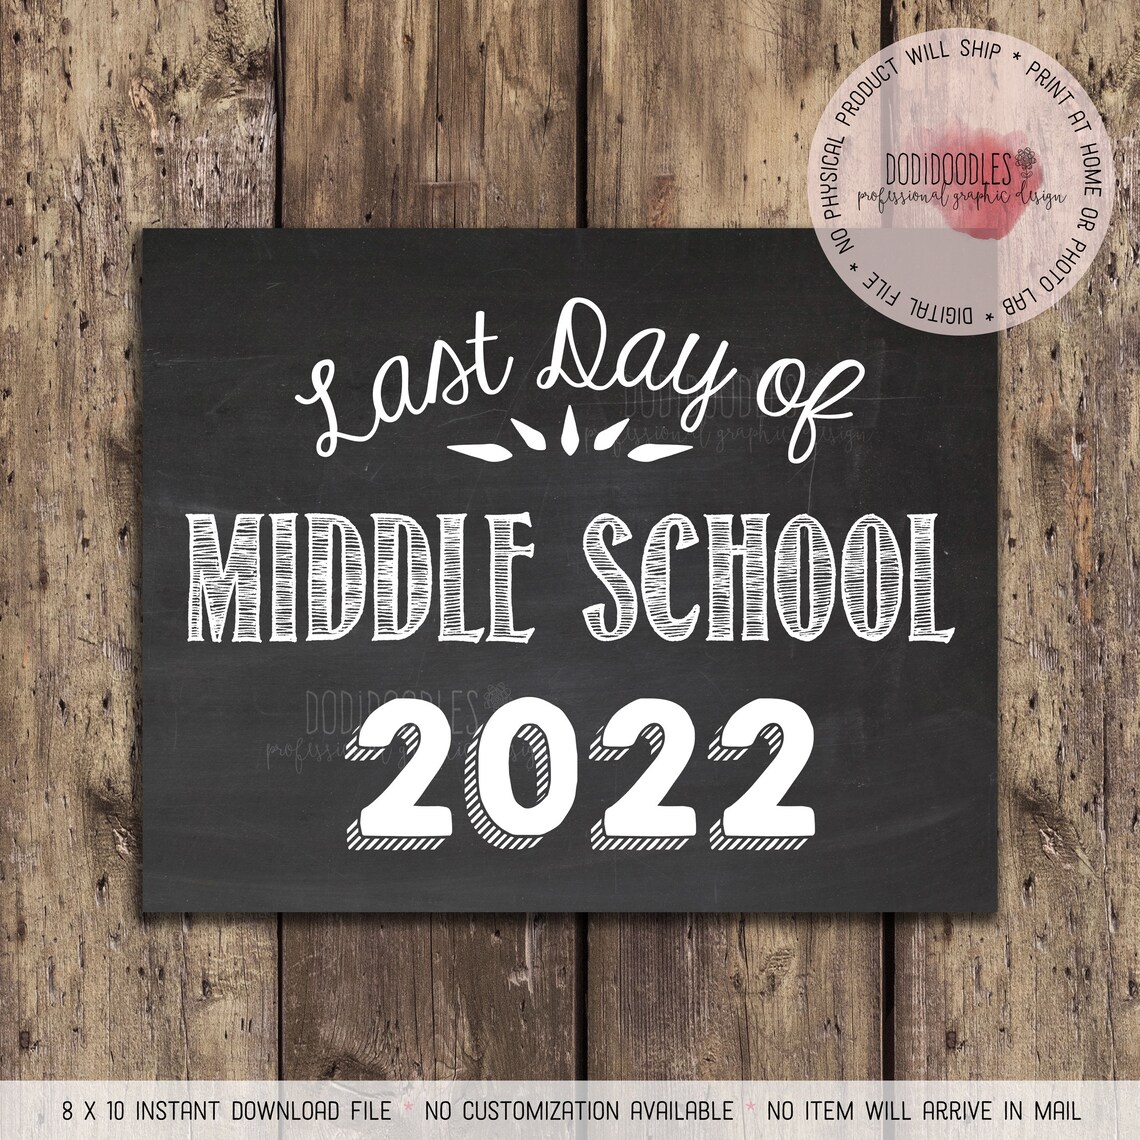 last-day-of-middle-school-2022-printable-sign-school-photo-etsy